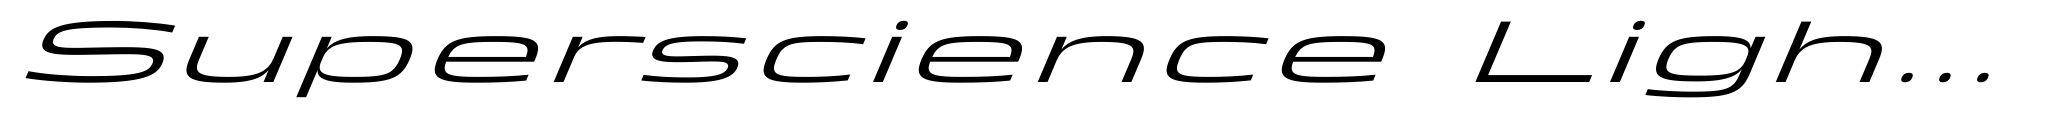 Superscience Light Ultra Expanded Italic image